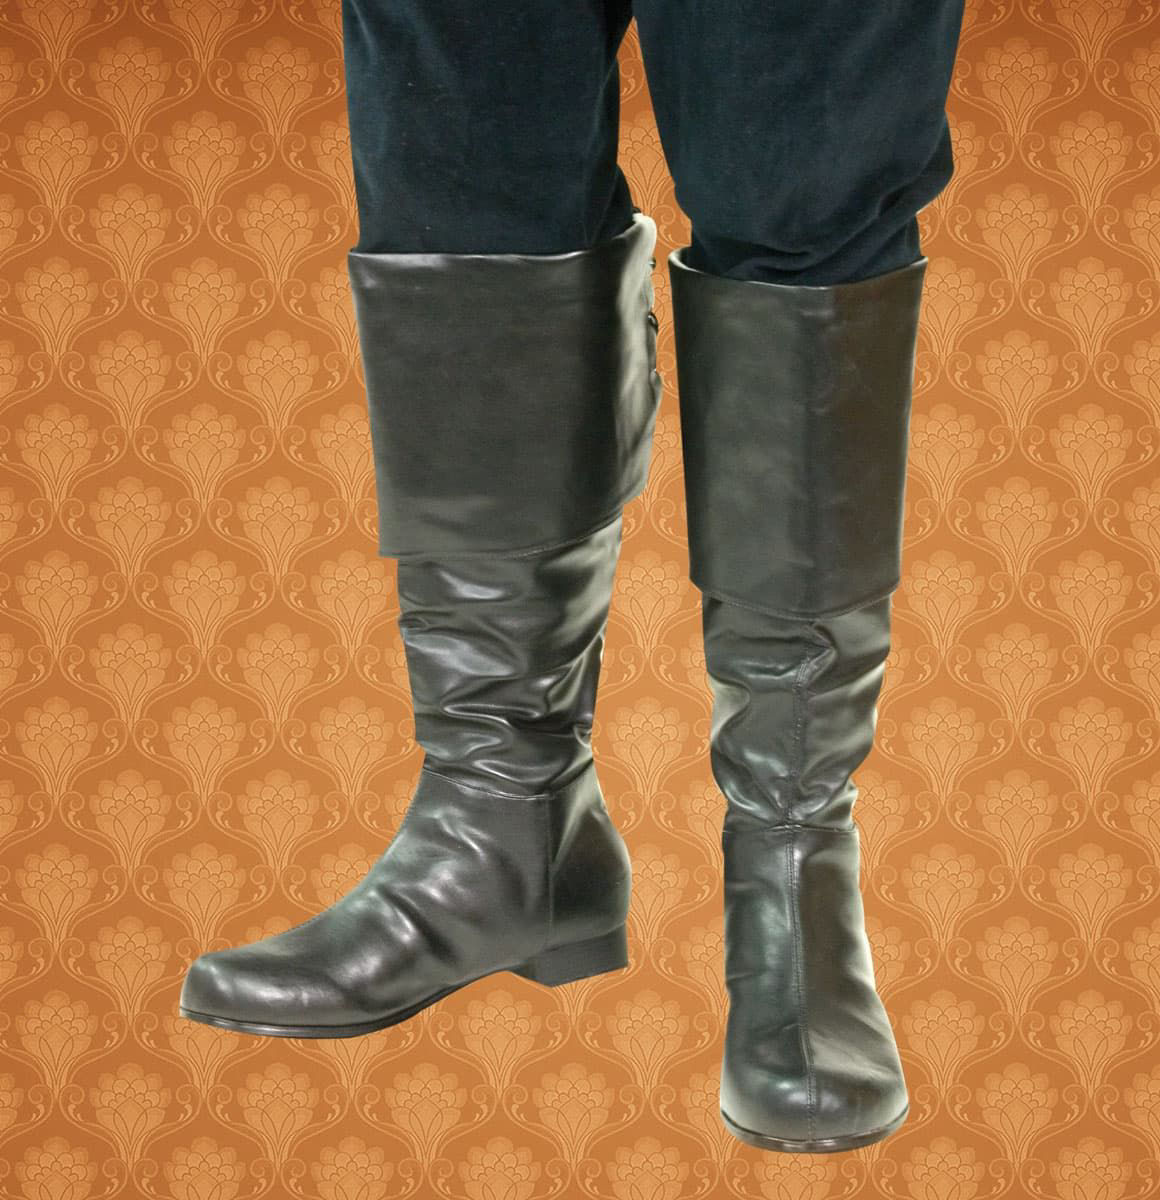 soft artificial leather boots with fold-over top flap, laces in back, and hidden zipper